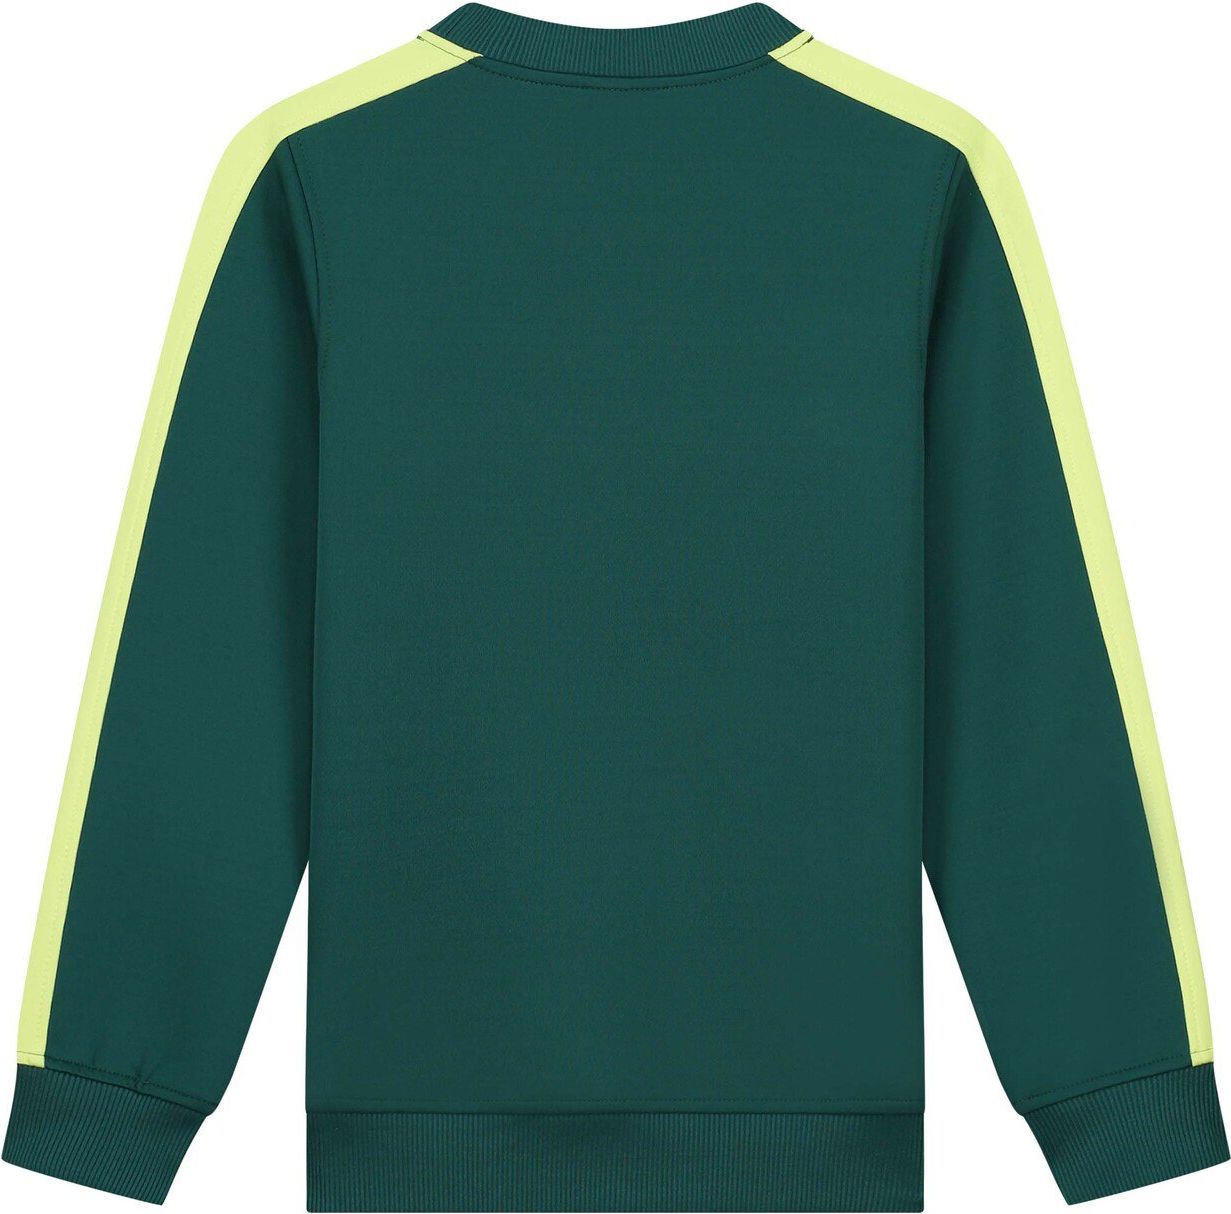 Malelions Academy Sweater - Teal/Lime Blauw